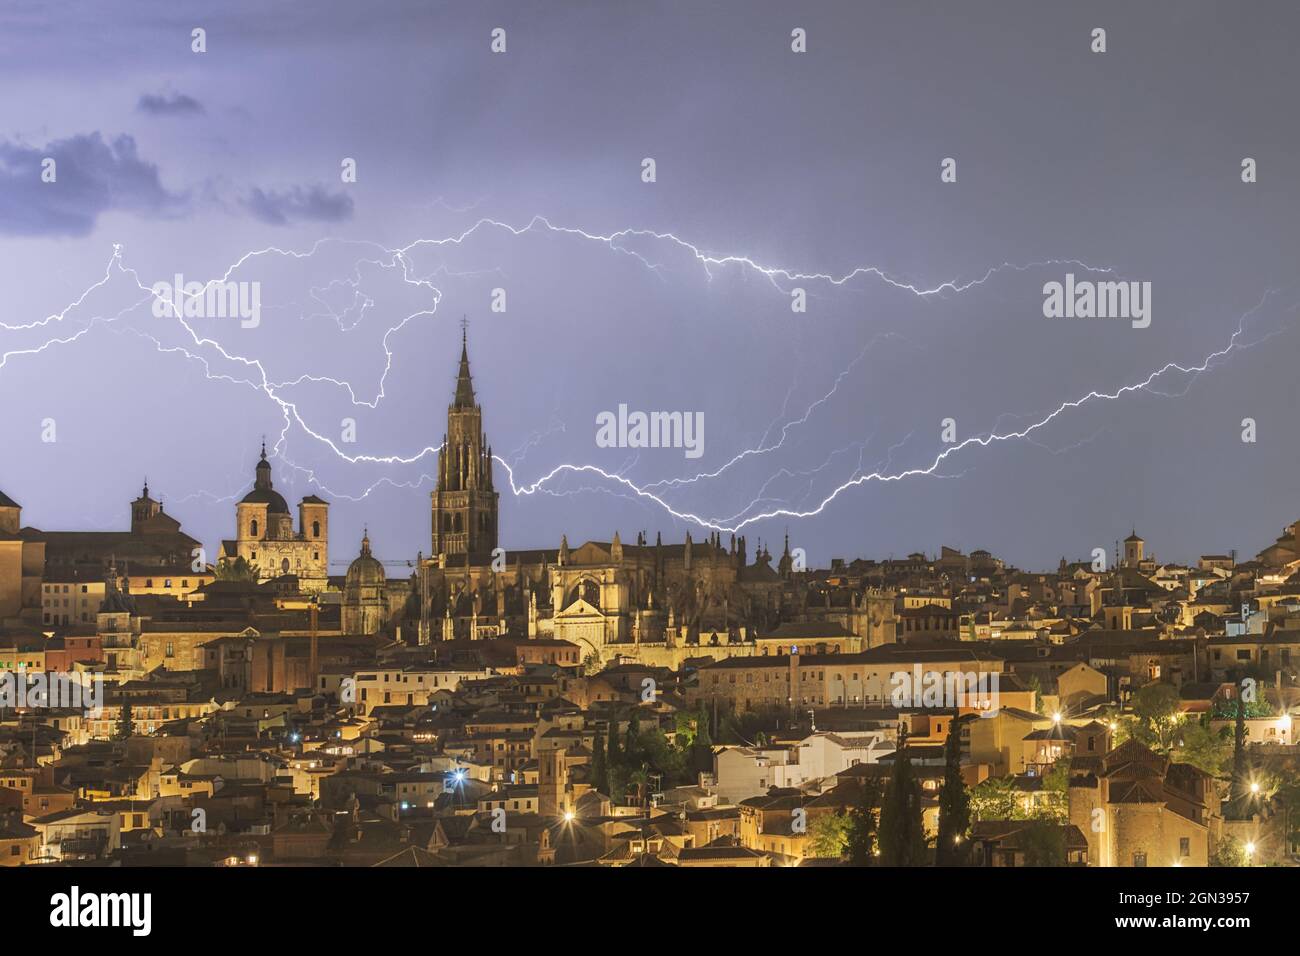 Cityscape of Toledo with high aged tower under cloudy sky with lightning during thunderstorm in night time Stock Photo